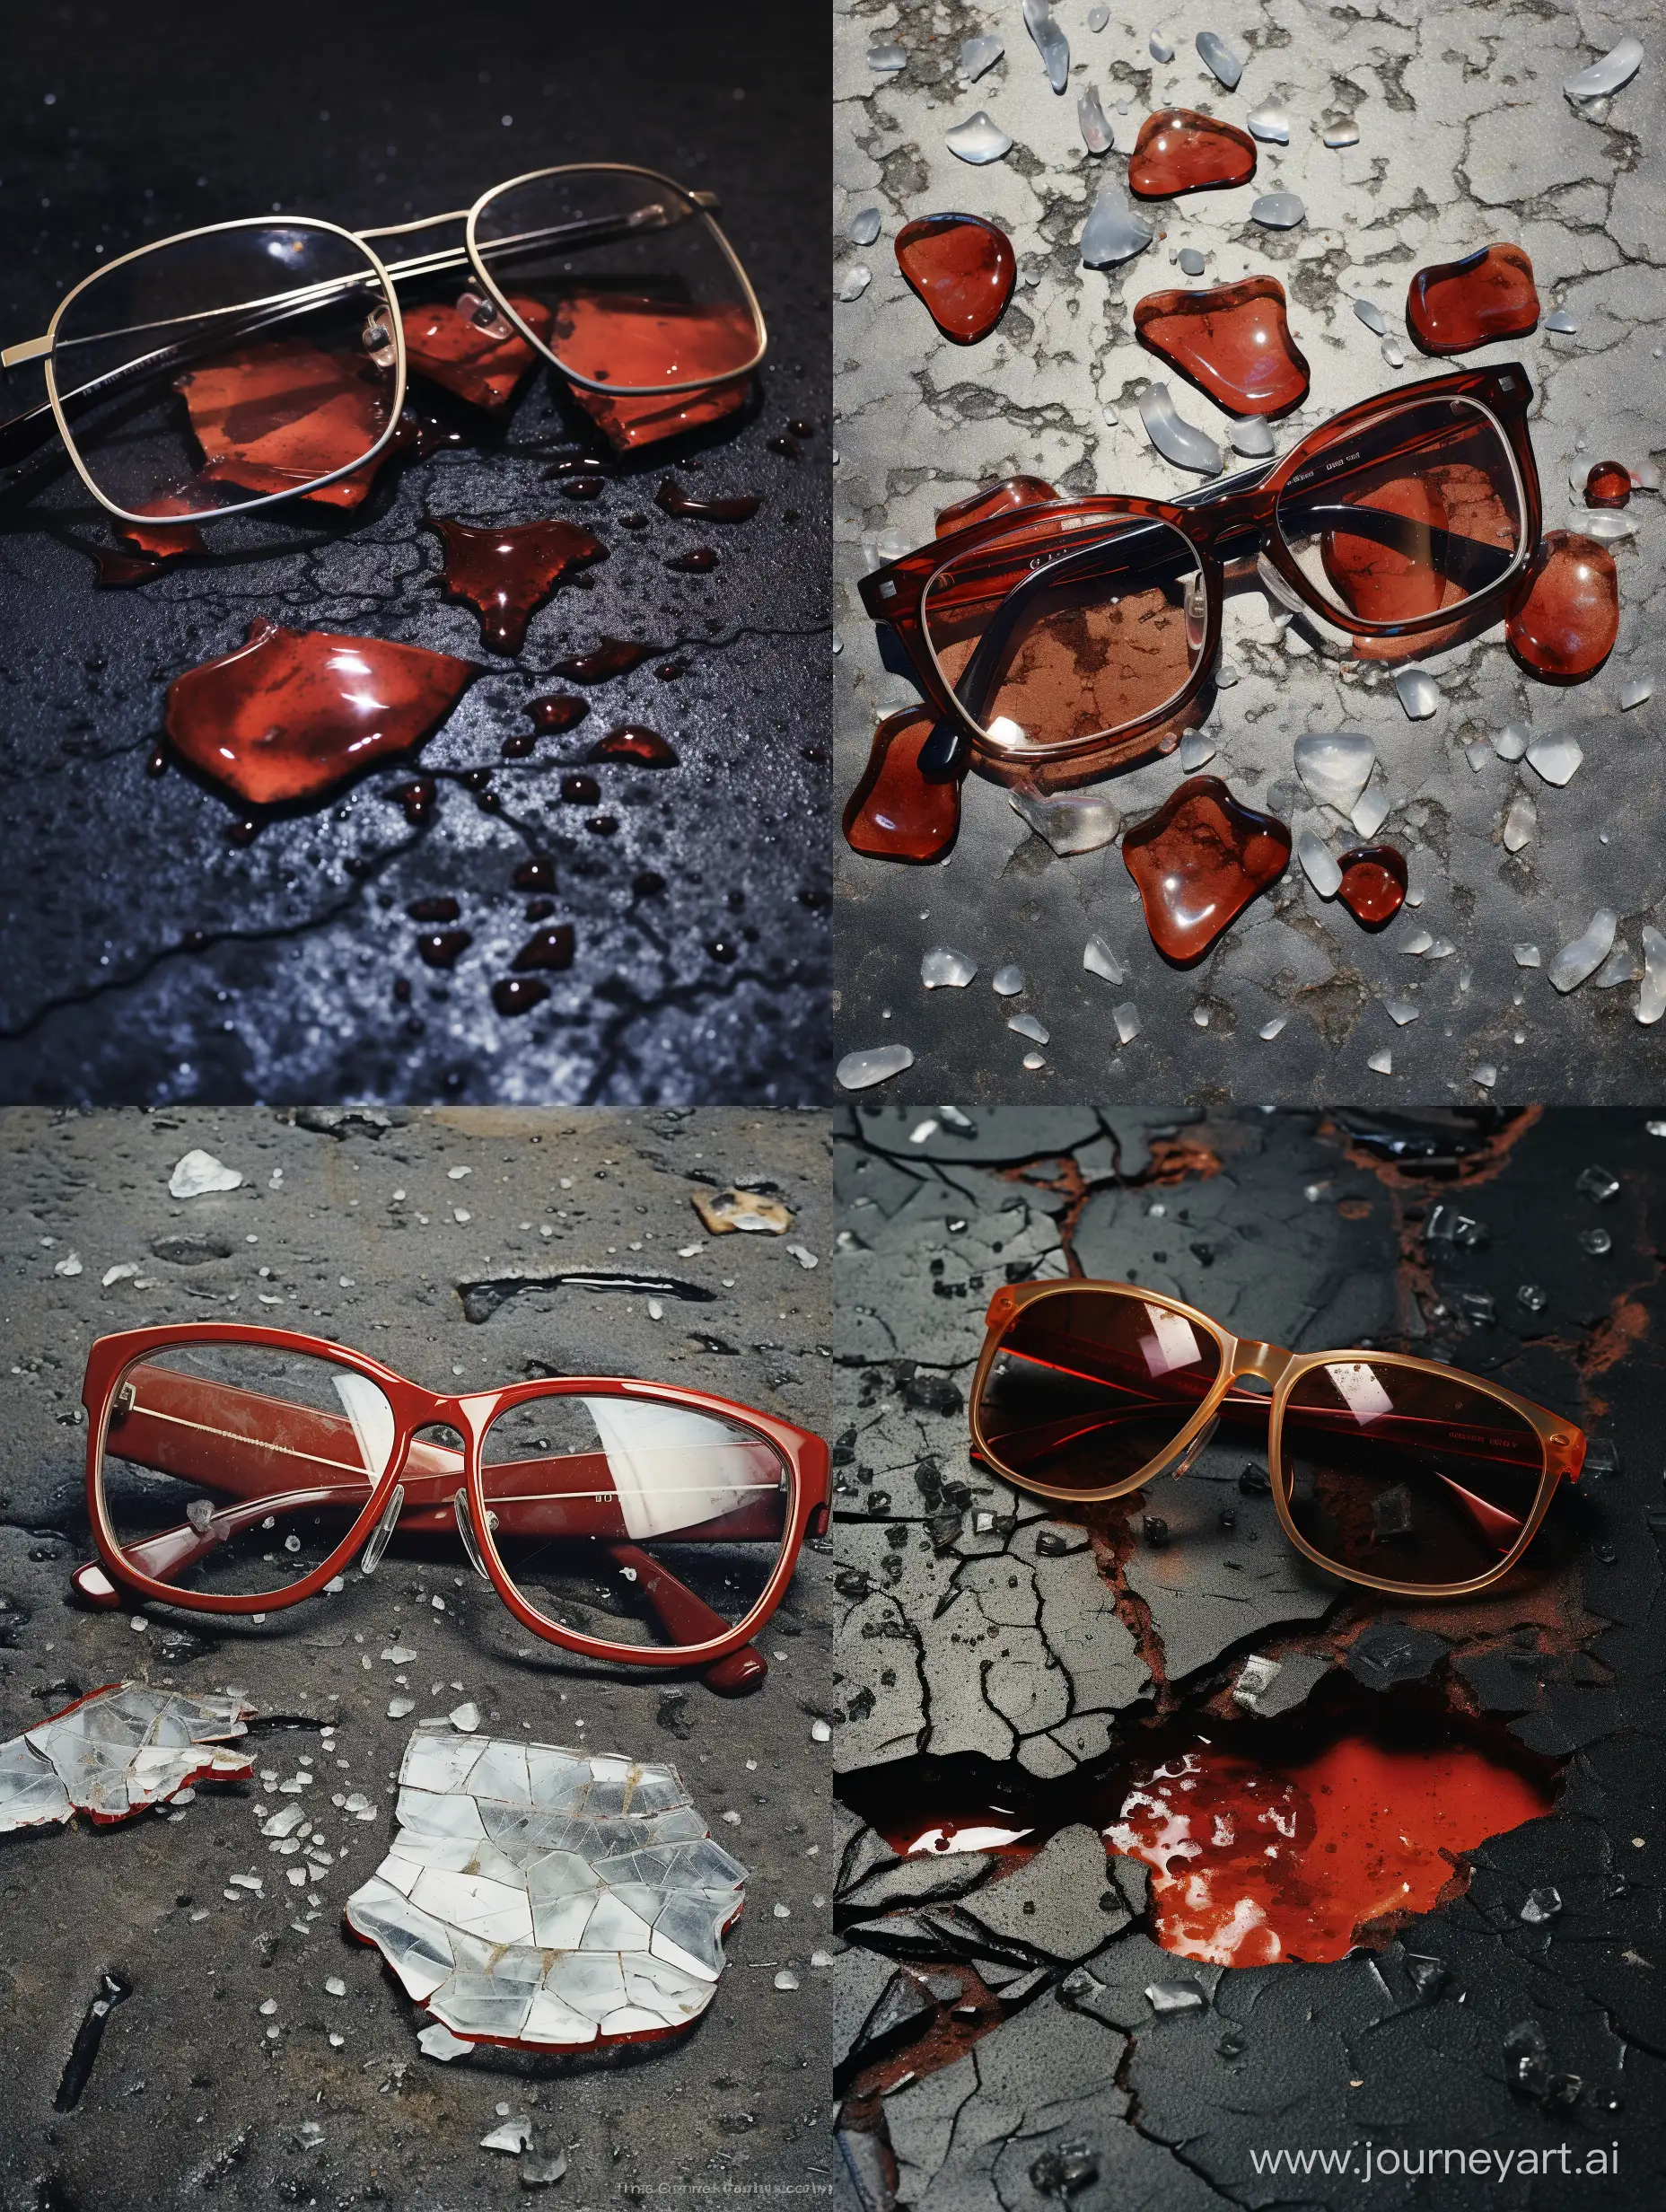 Blood stains the asphalt around a pair of broken glasses, with fragments scattered nearby. The lenses are smeared with blood and the glasses are slightly shattered. The glasses appear to be made out of wax, but they look so realistic that they seem to be burning like a candle.